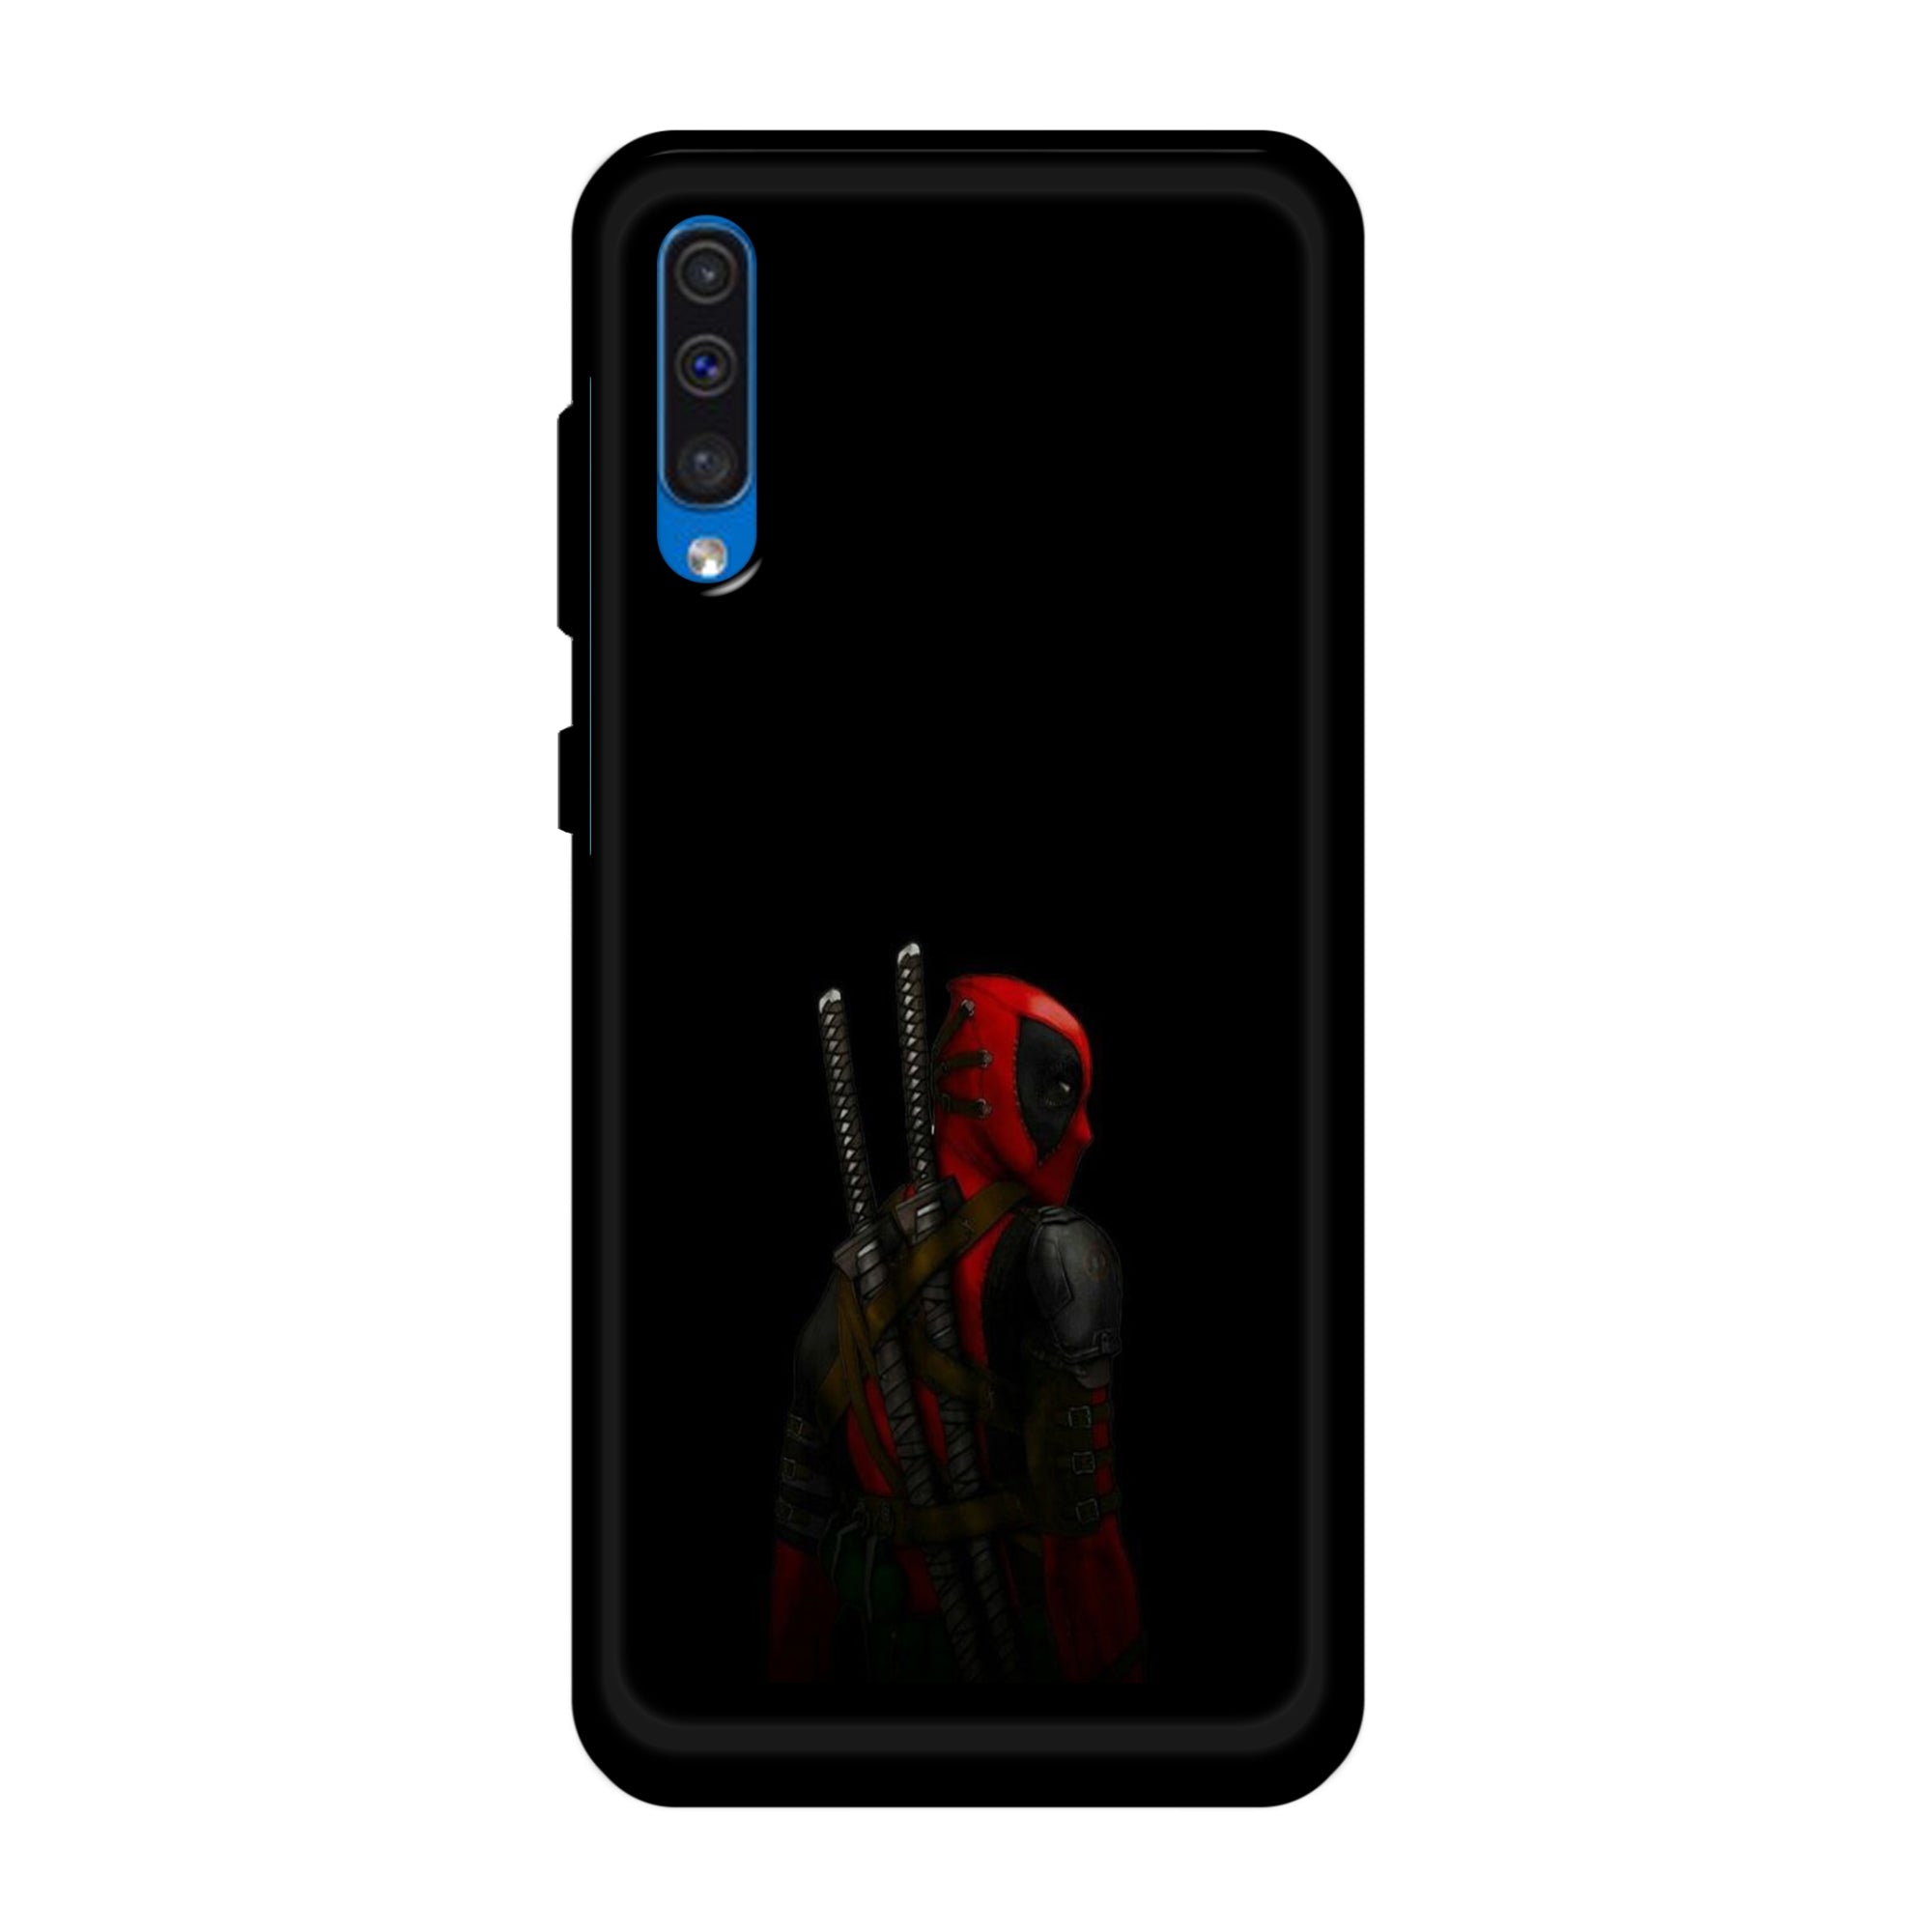 Buy Deadpool Metal-Silicon Back Mobile Phone Case/Cover For Samsung Galaxy A50 / A50s / A30s Online